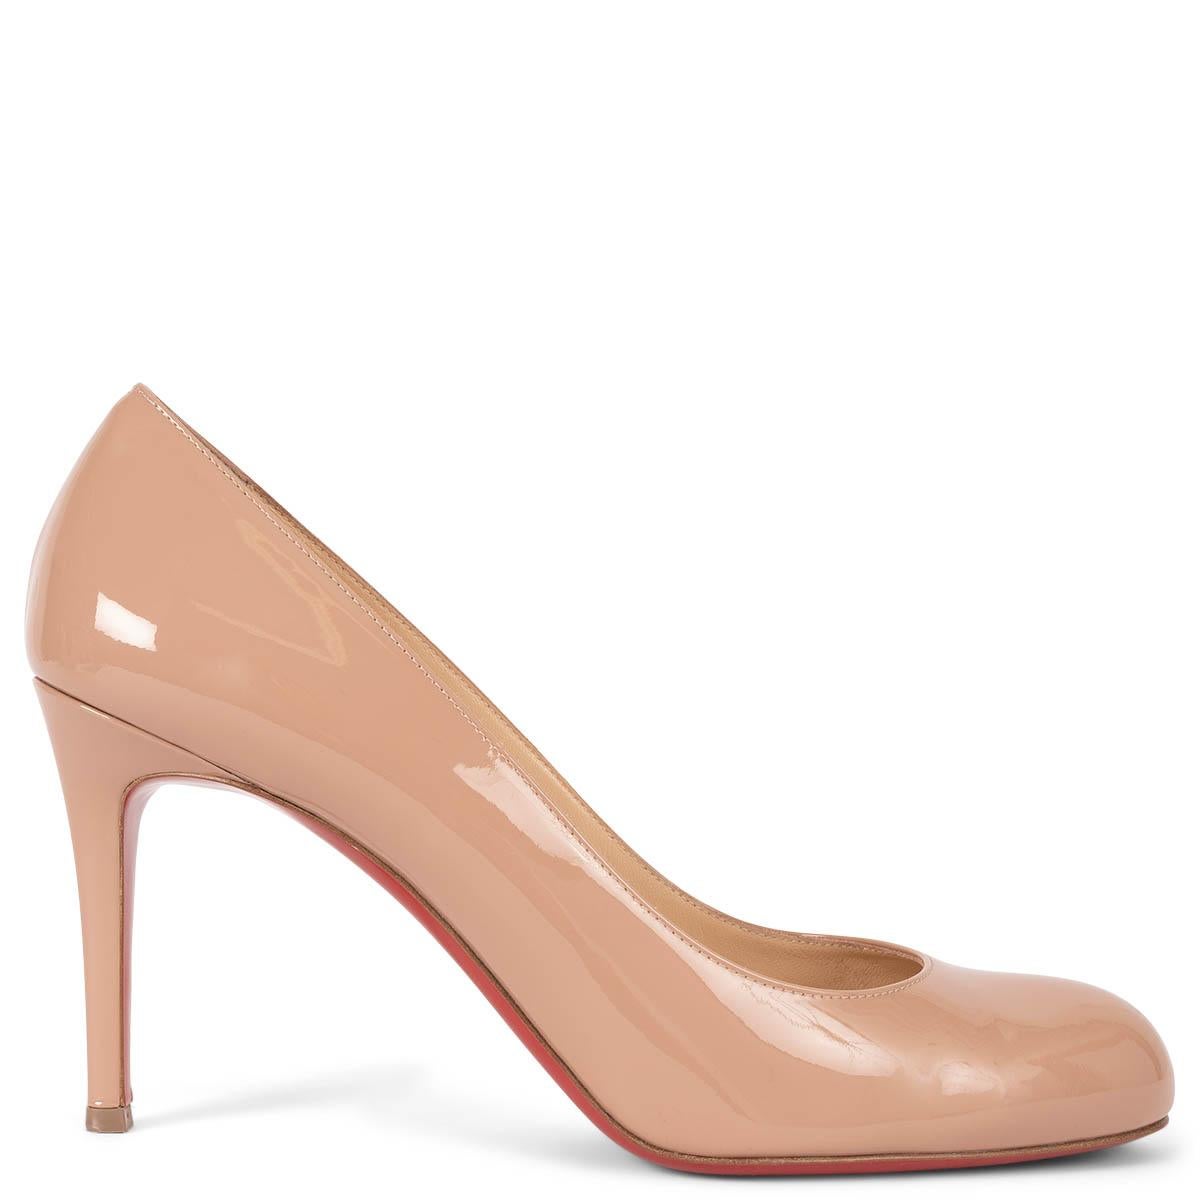 CHRISTIAN LOUBOUTIN nude patent leather SIMPLE PUMP 85 Pumps Shoes 40.5 fit 40 For Sale